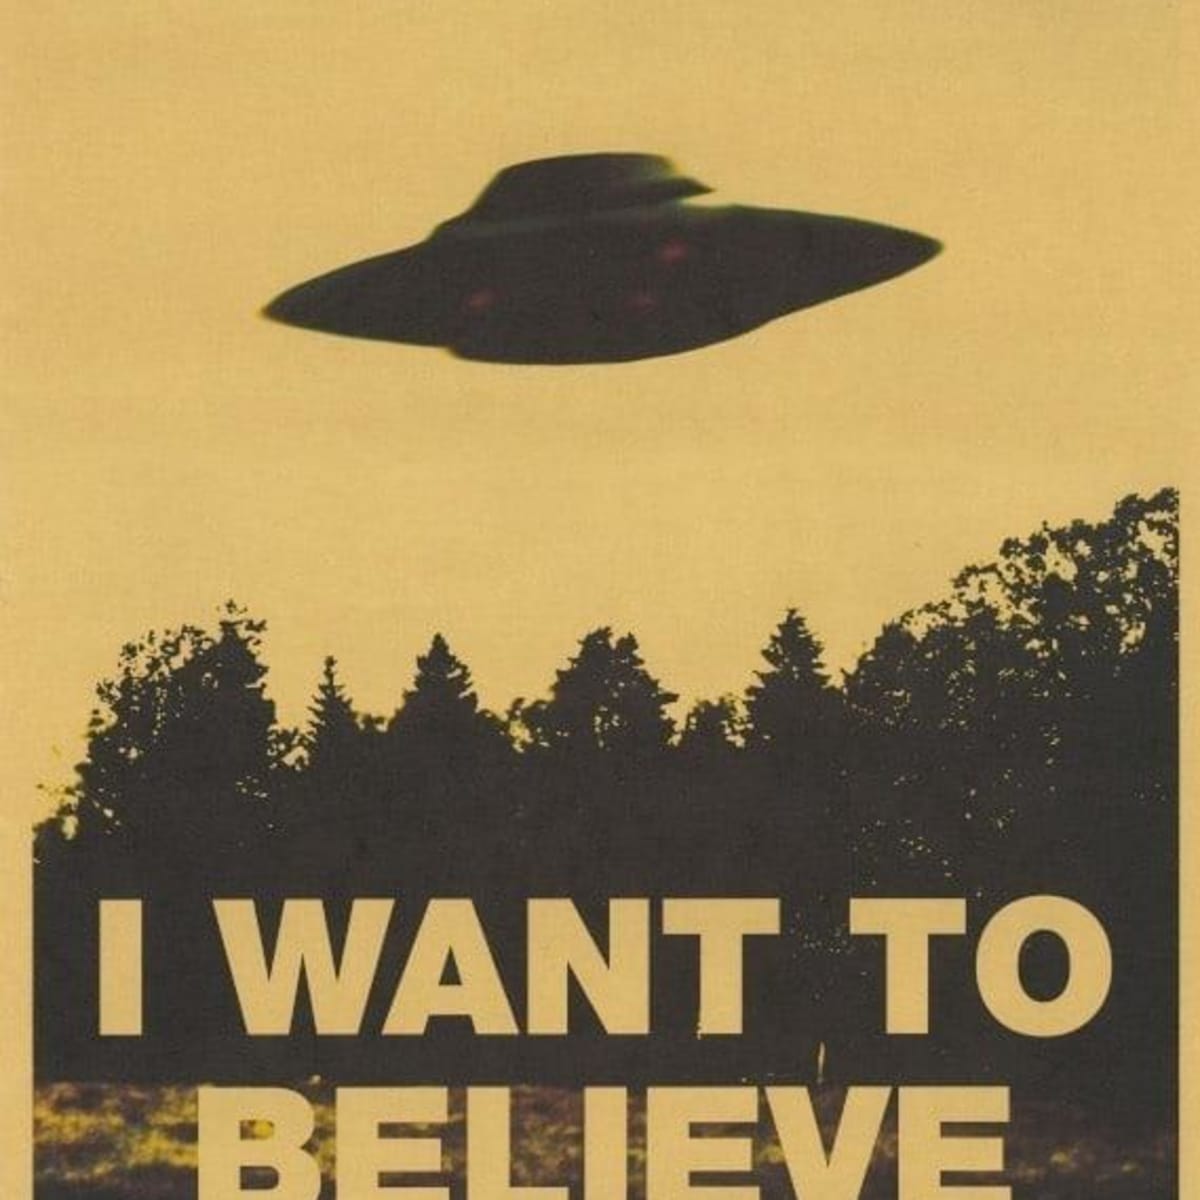 i want to believe poster official